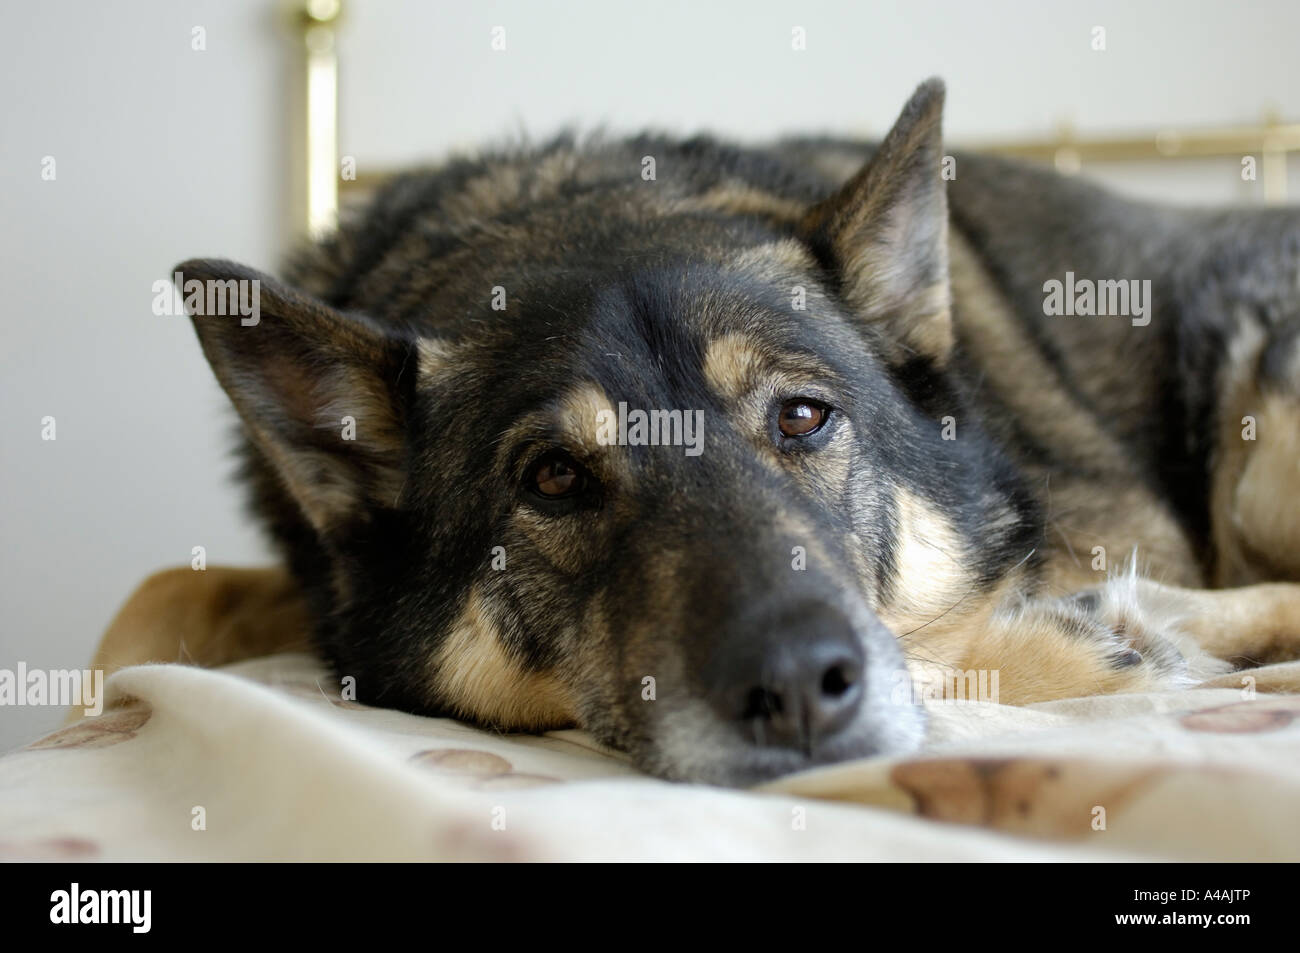 German Shepherd And Norwegian Elkhound Mix Breed Dog Lying On A Bed Stock Photo Alamy